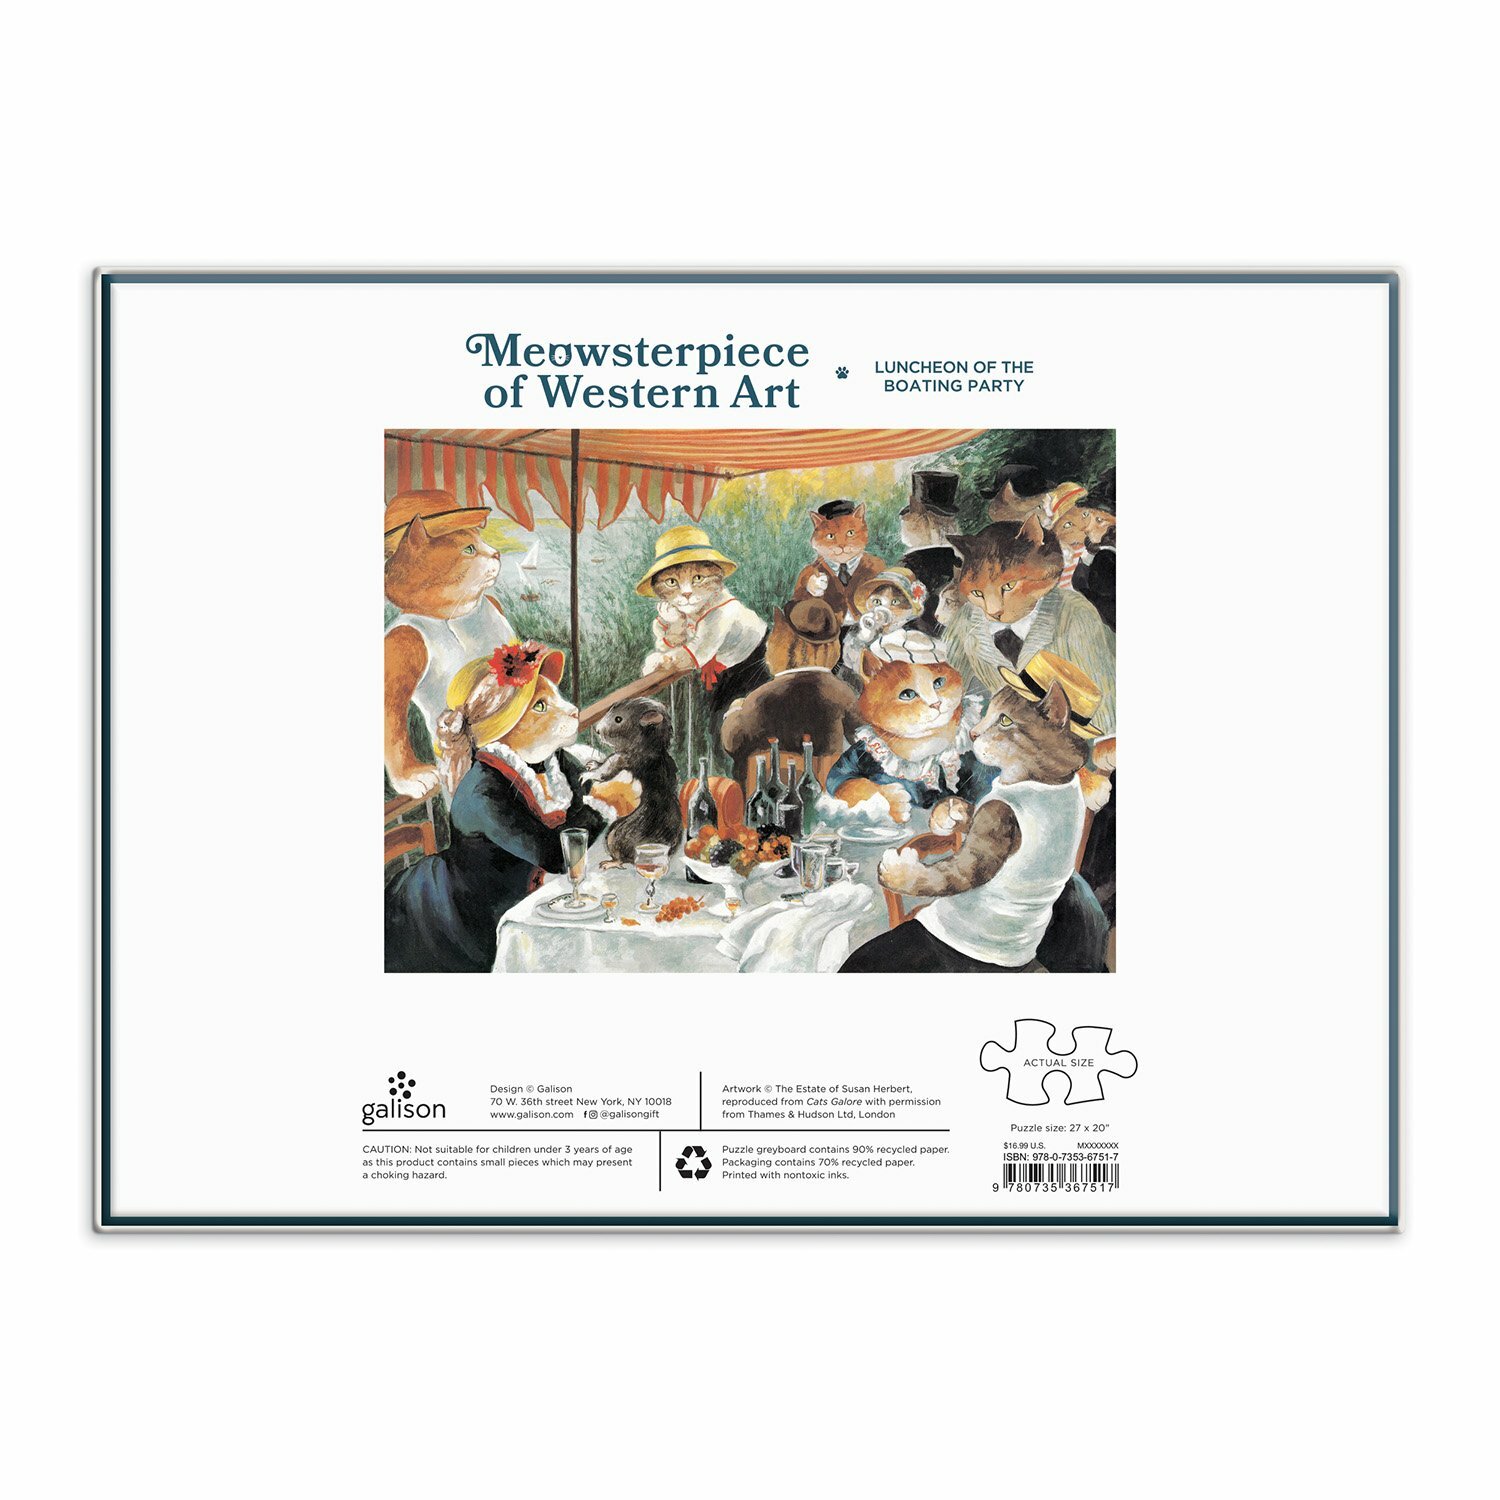 luncheon-of-the-boating-party-meowsterpiece-of-western-art-1000-piece-puzzle-1000-piece-puzzles-meowsterpiece-of-western-art-collection-437852_2400x.jpg